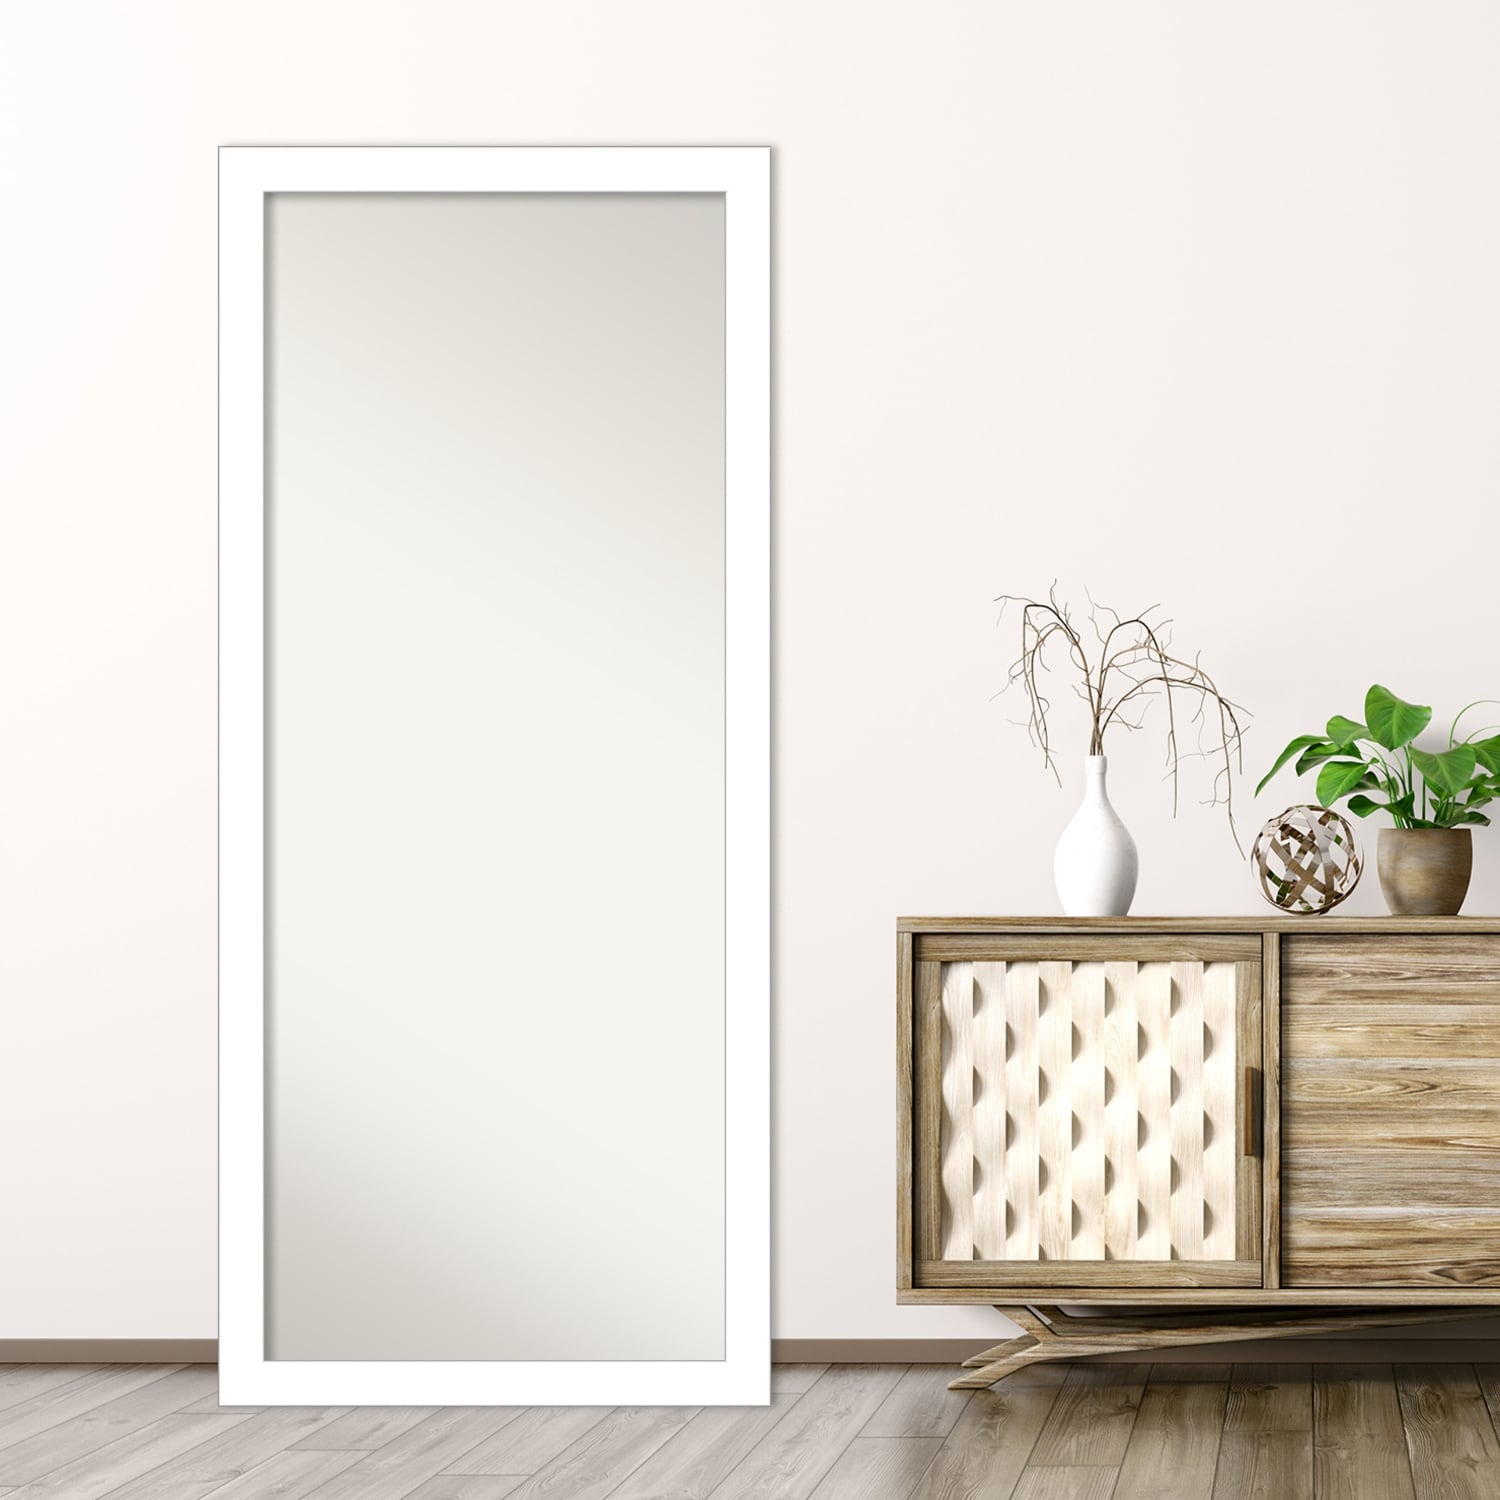 https://ak1.ostkcdn.com/images/products/is/images/direct/8586e6ca32197276149253ca901ca40d65ff9f11/Non-Beveled-Wood-Full-Length-Floor-Leaner-Mirror---Wedge-White-Frame.jpg